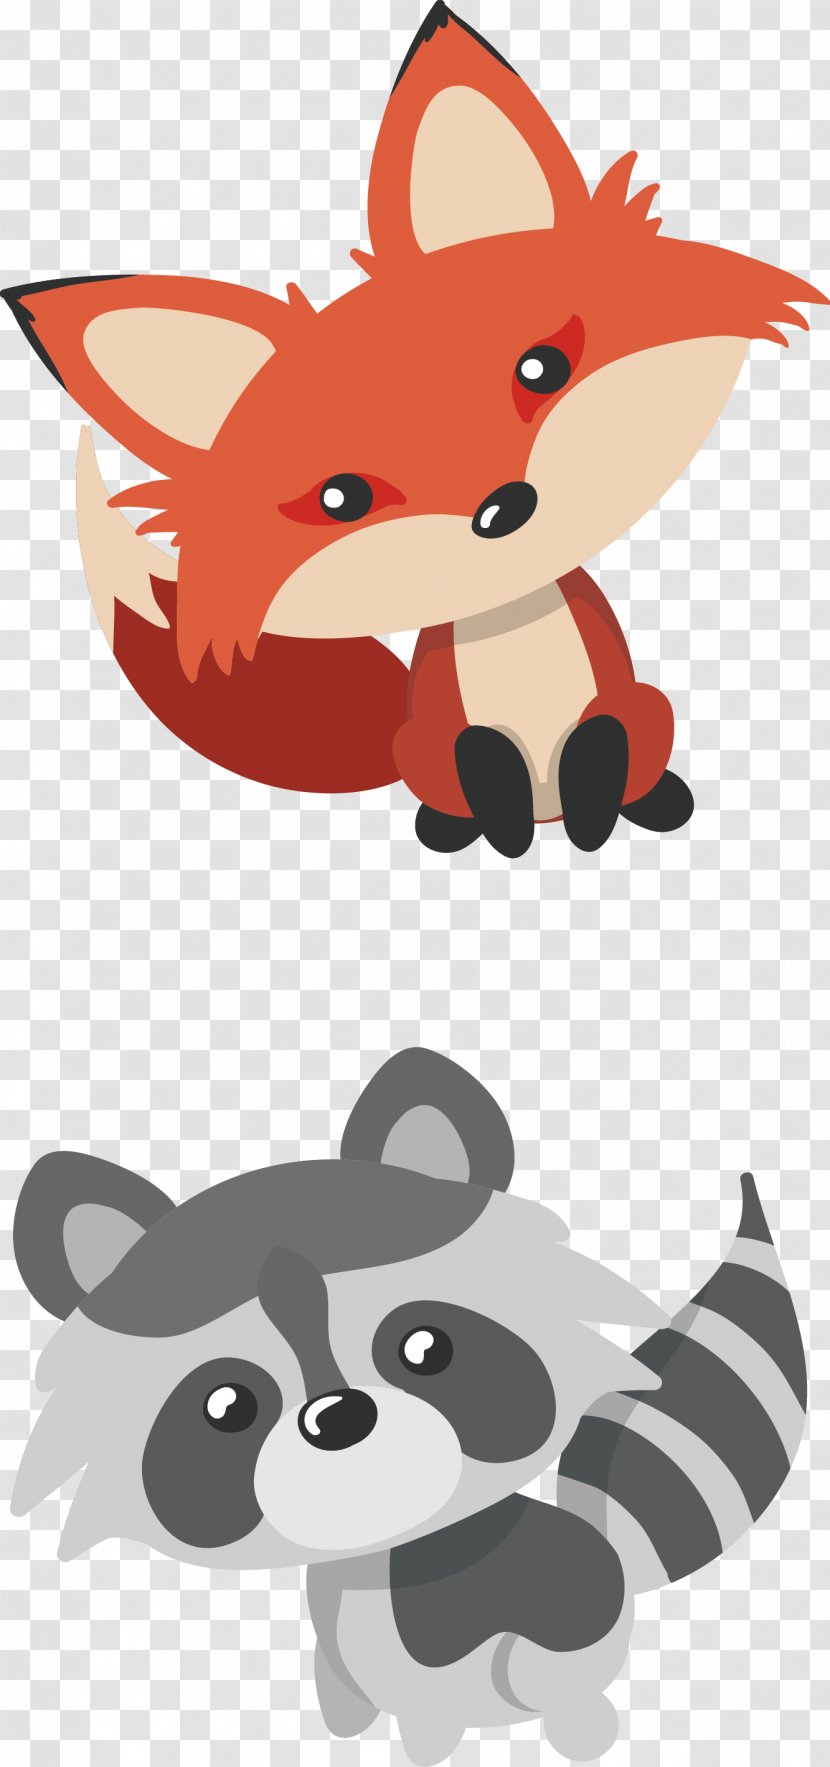 Visual Arts - Tail - Creative Small Forest Animals Transparent PNG